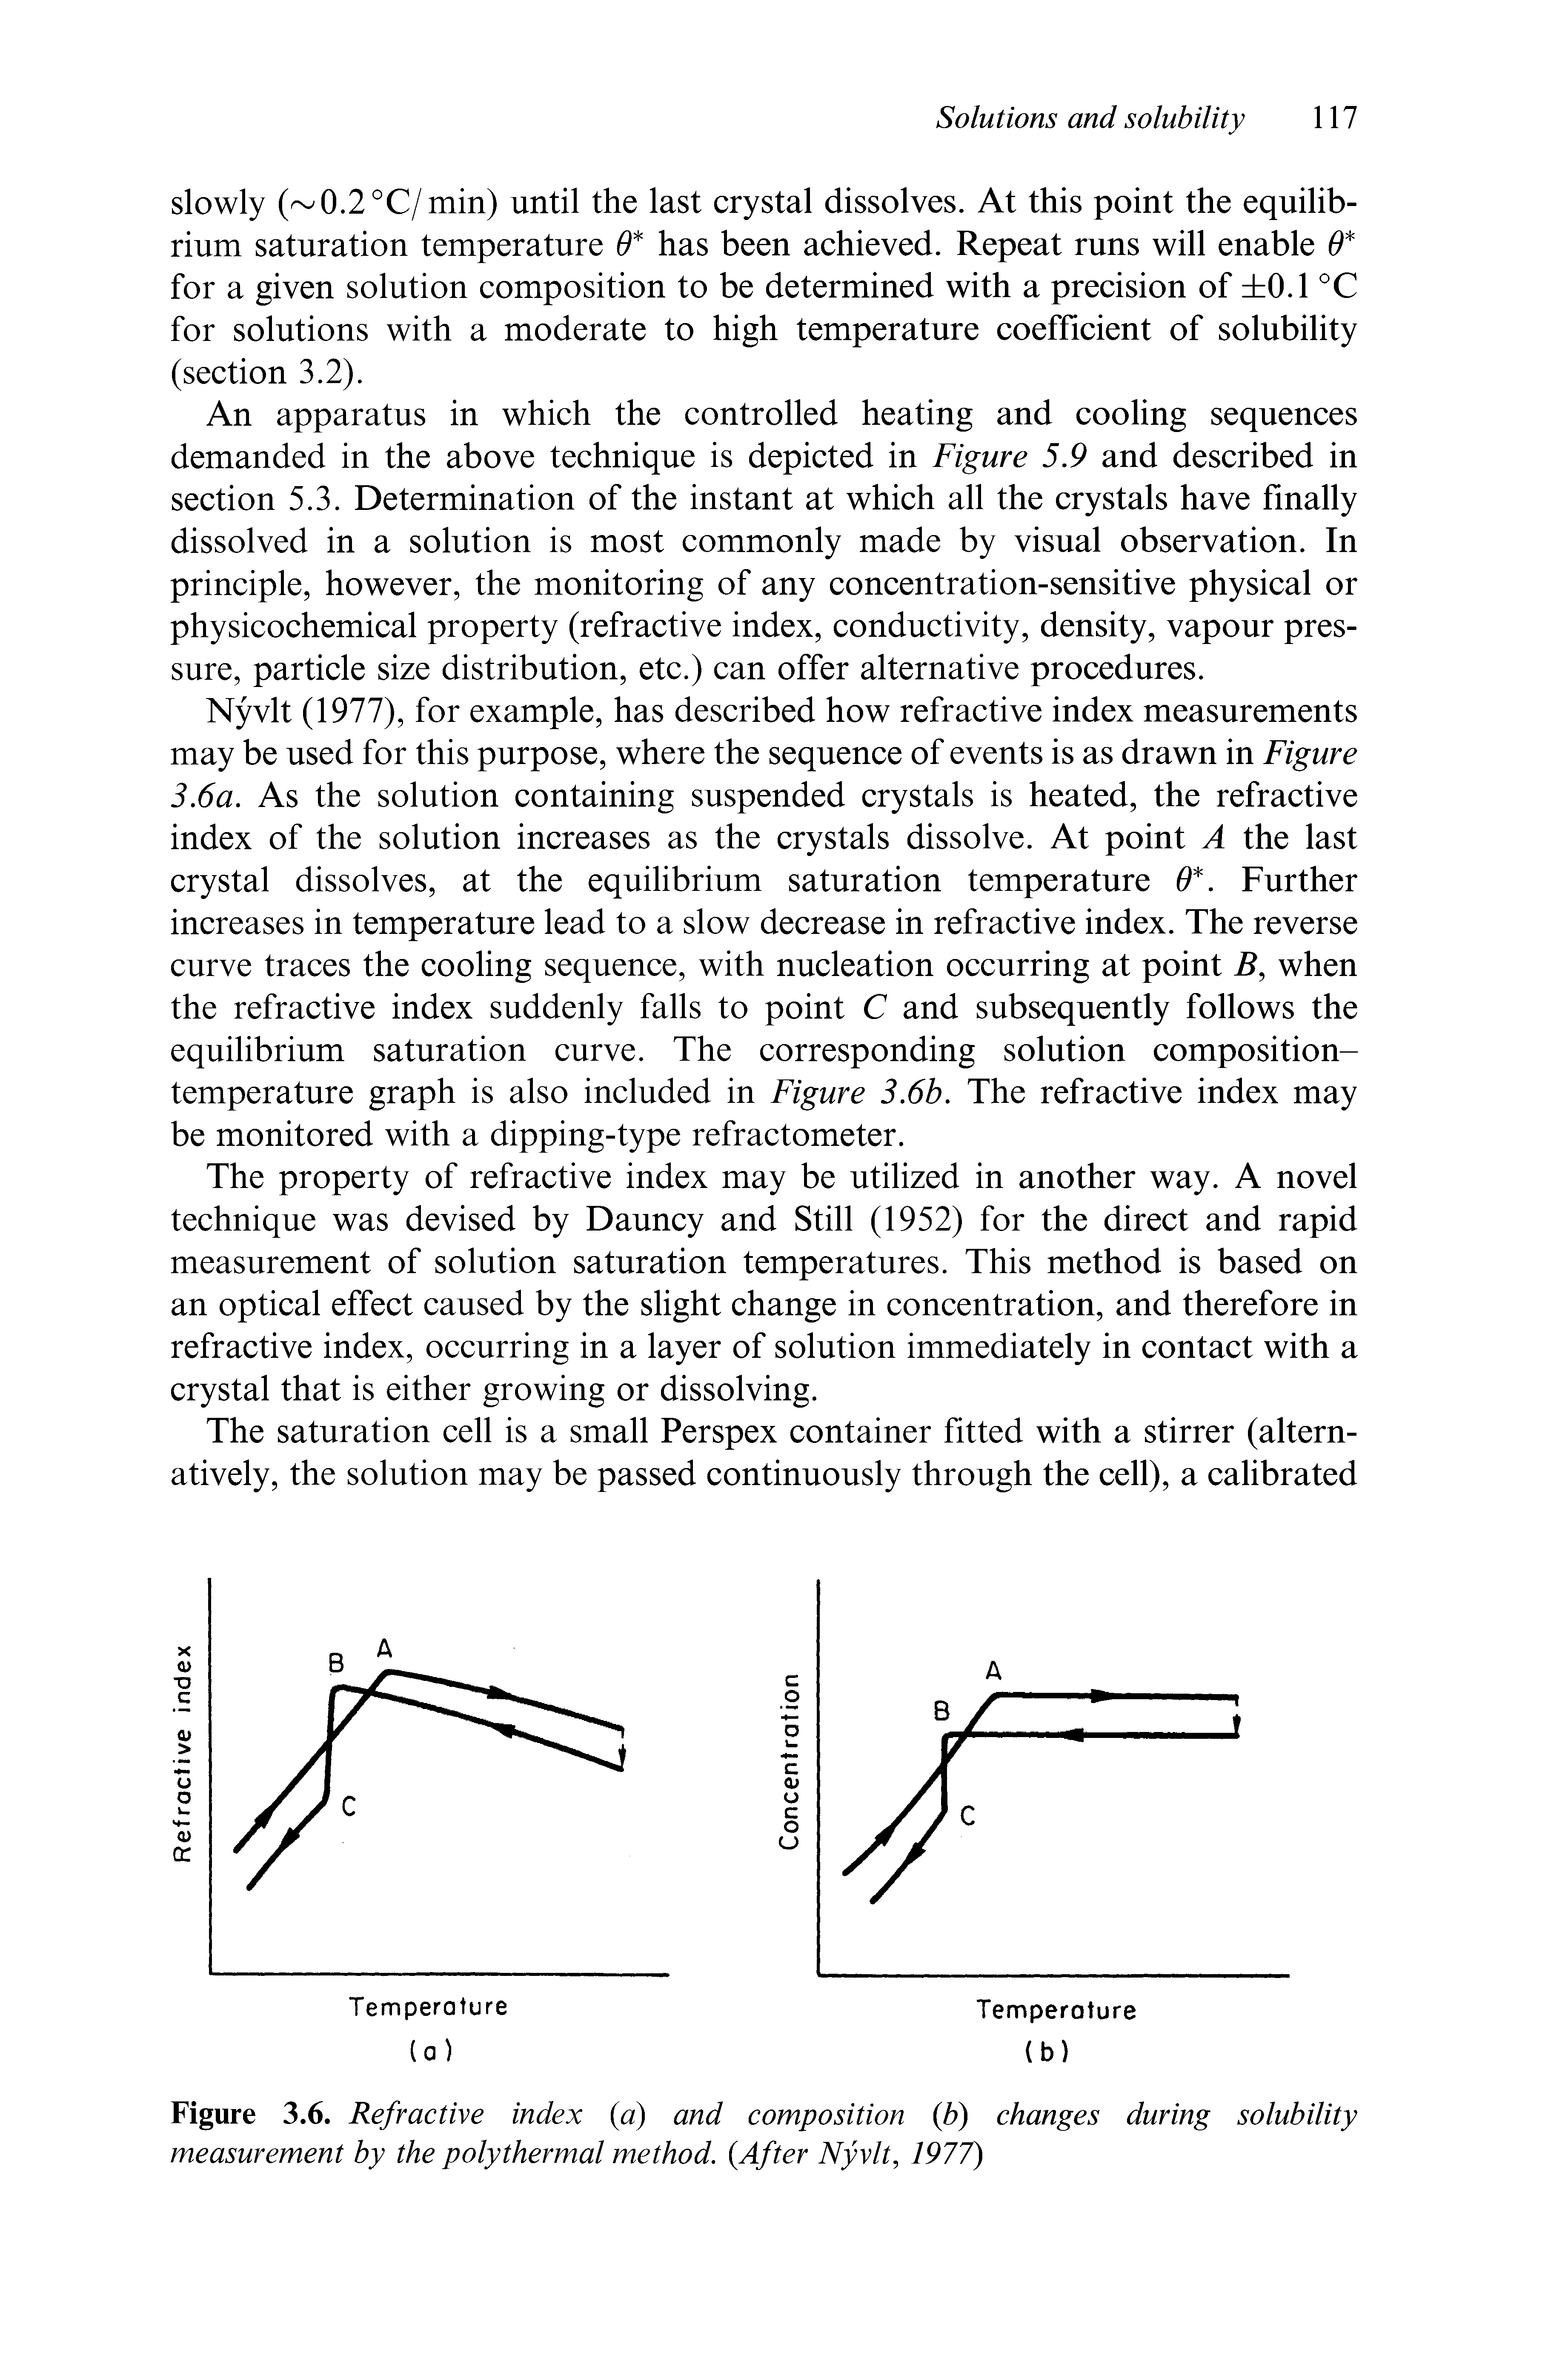 Figure 3.6. Refractive index a) and composition (Jb) changes during solubility measurement by the poly thermal method. After Nyvlt, 1977)...